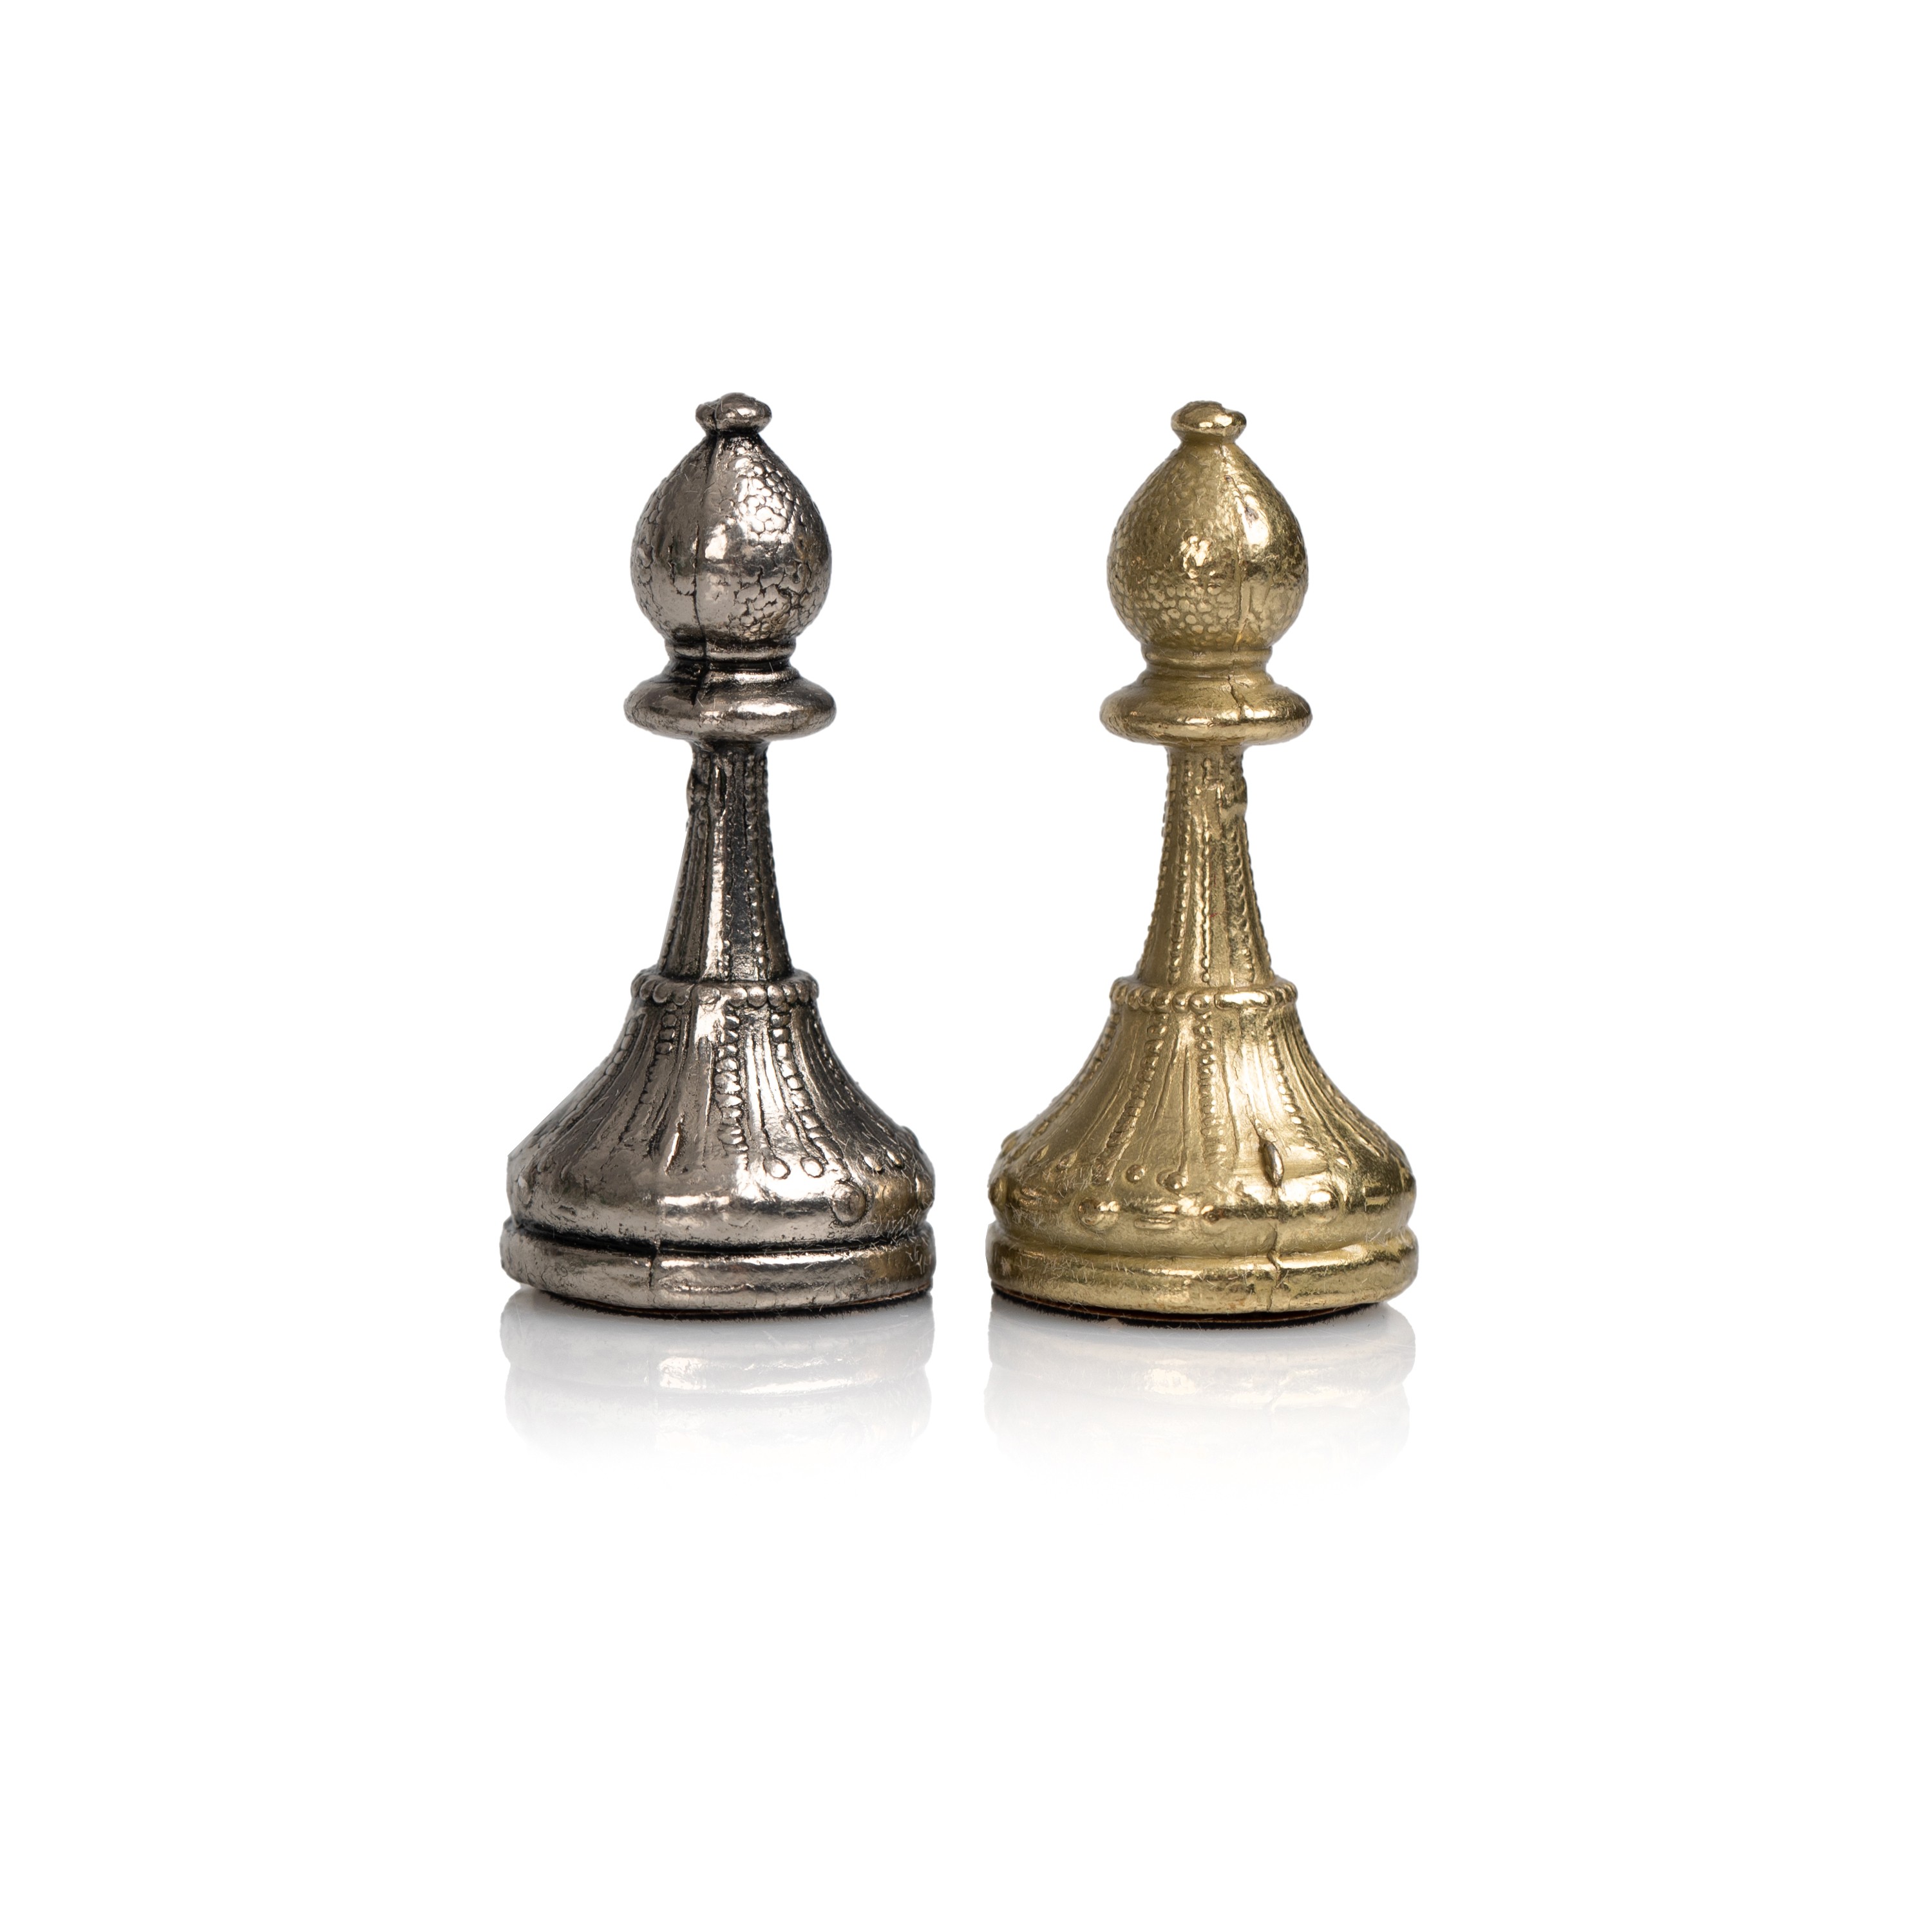 Details about   High quality METAL Chess Set with Brass Effect Chess Board 